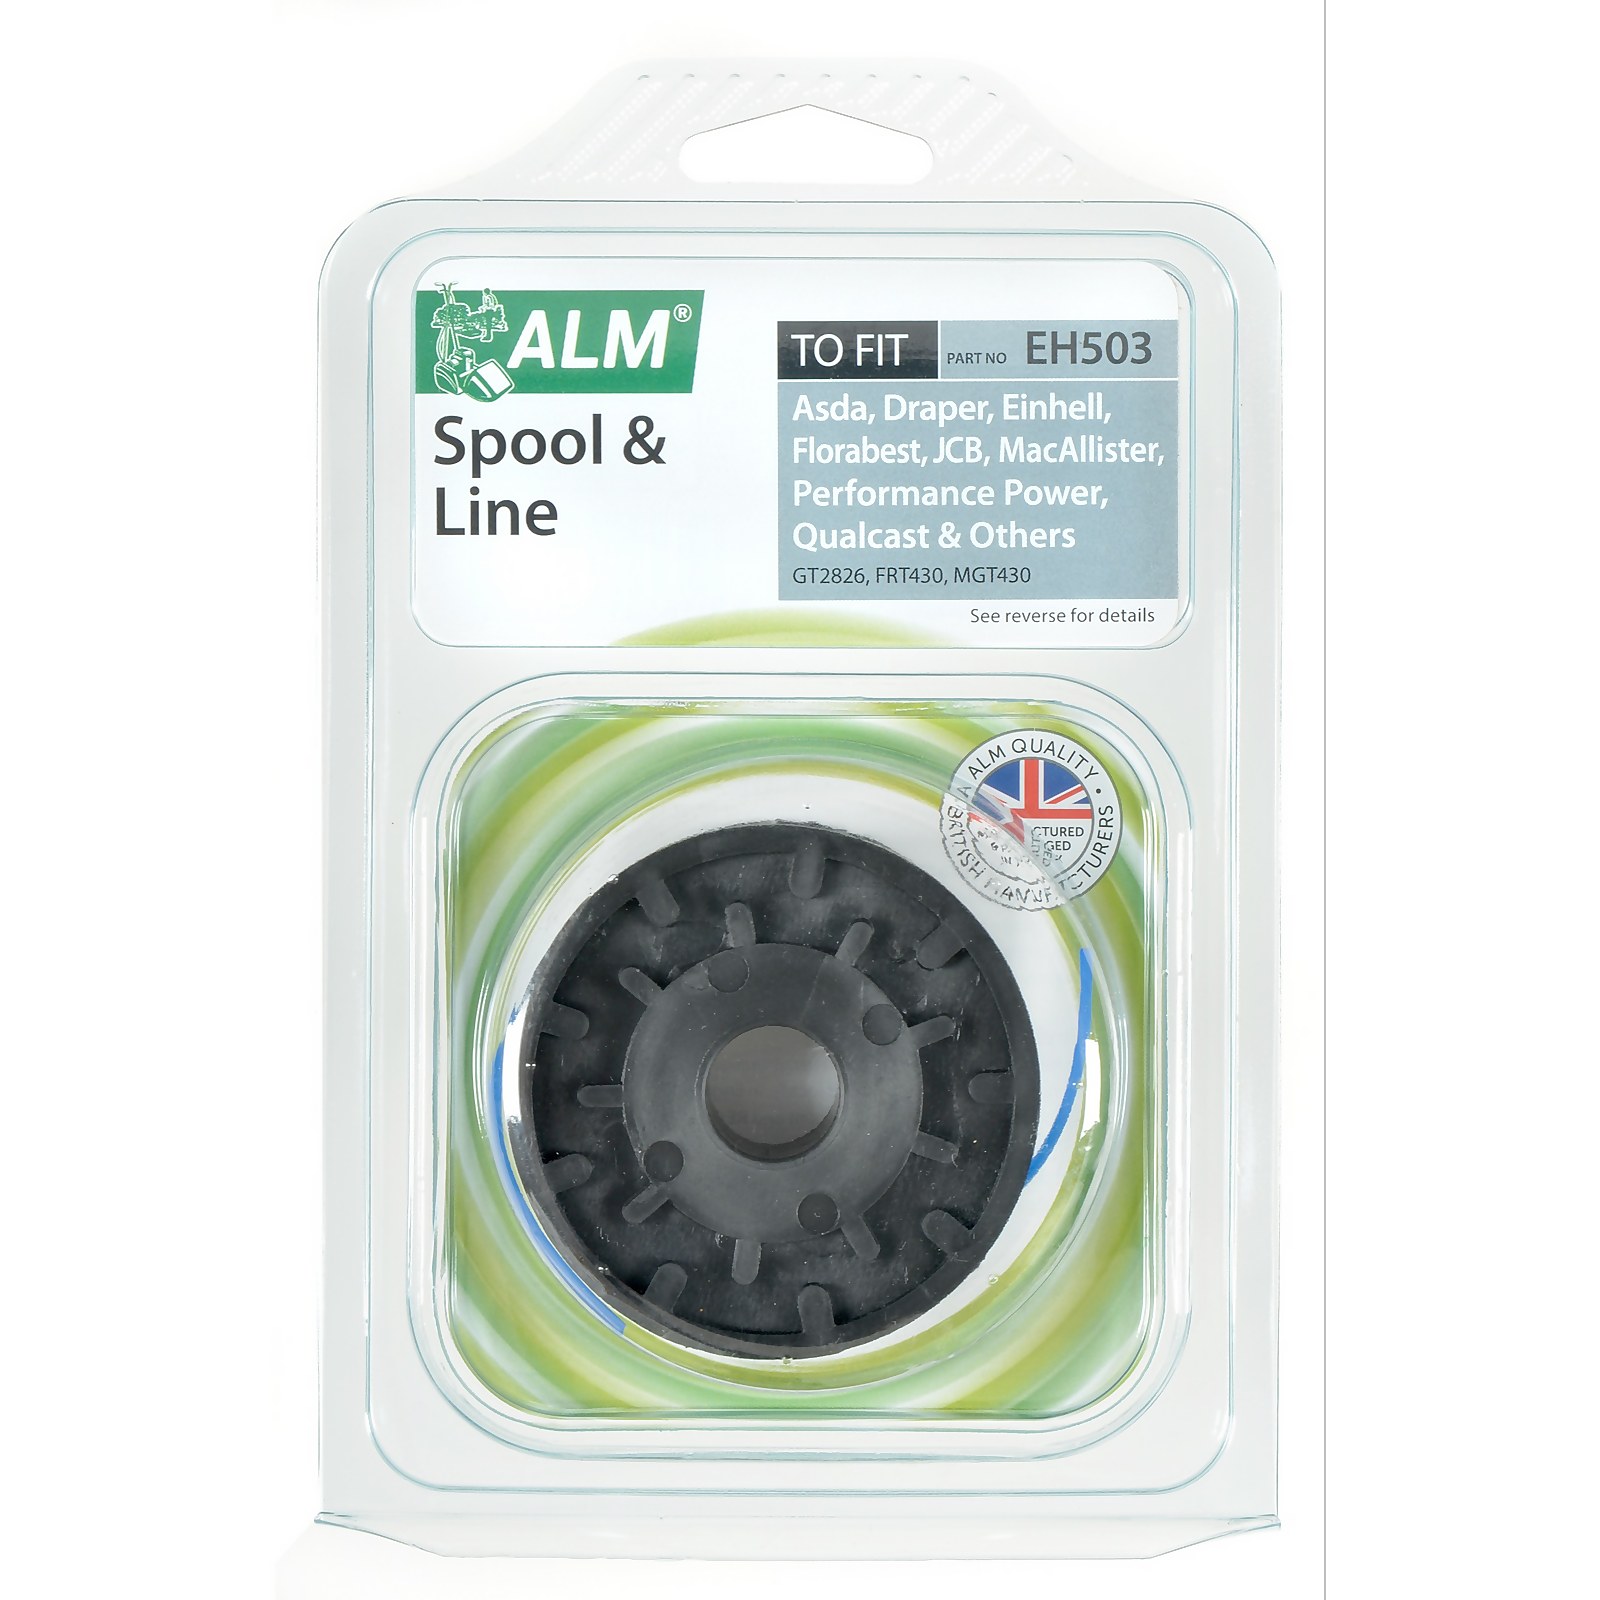 Photo of Alm Spool & Line For Qualcast Gt2826